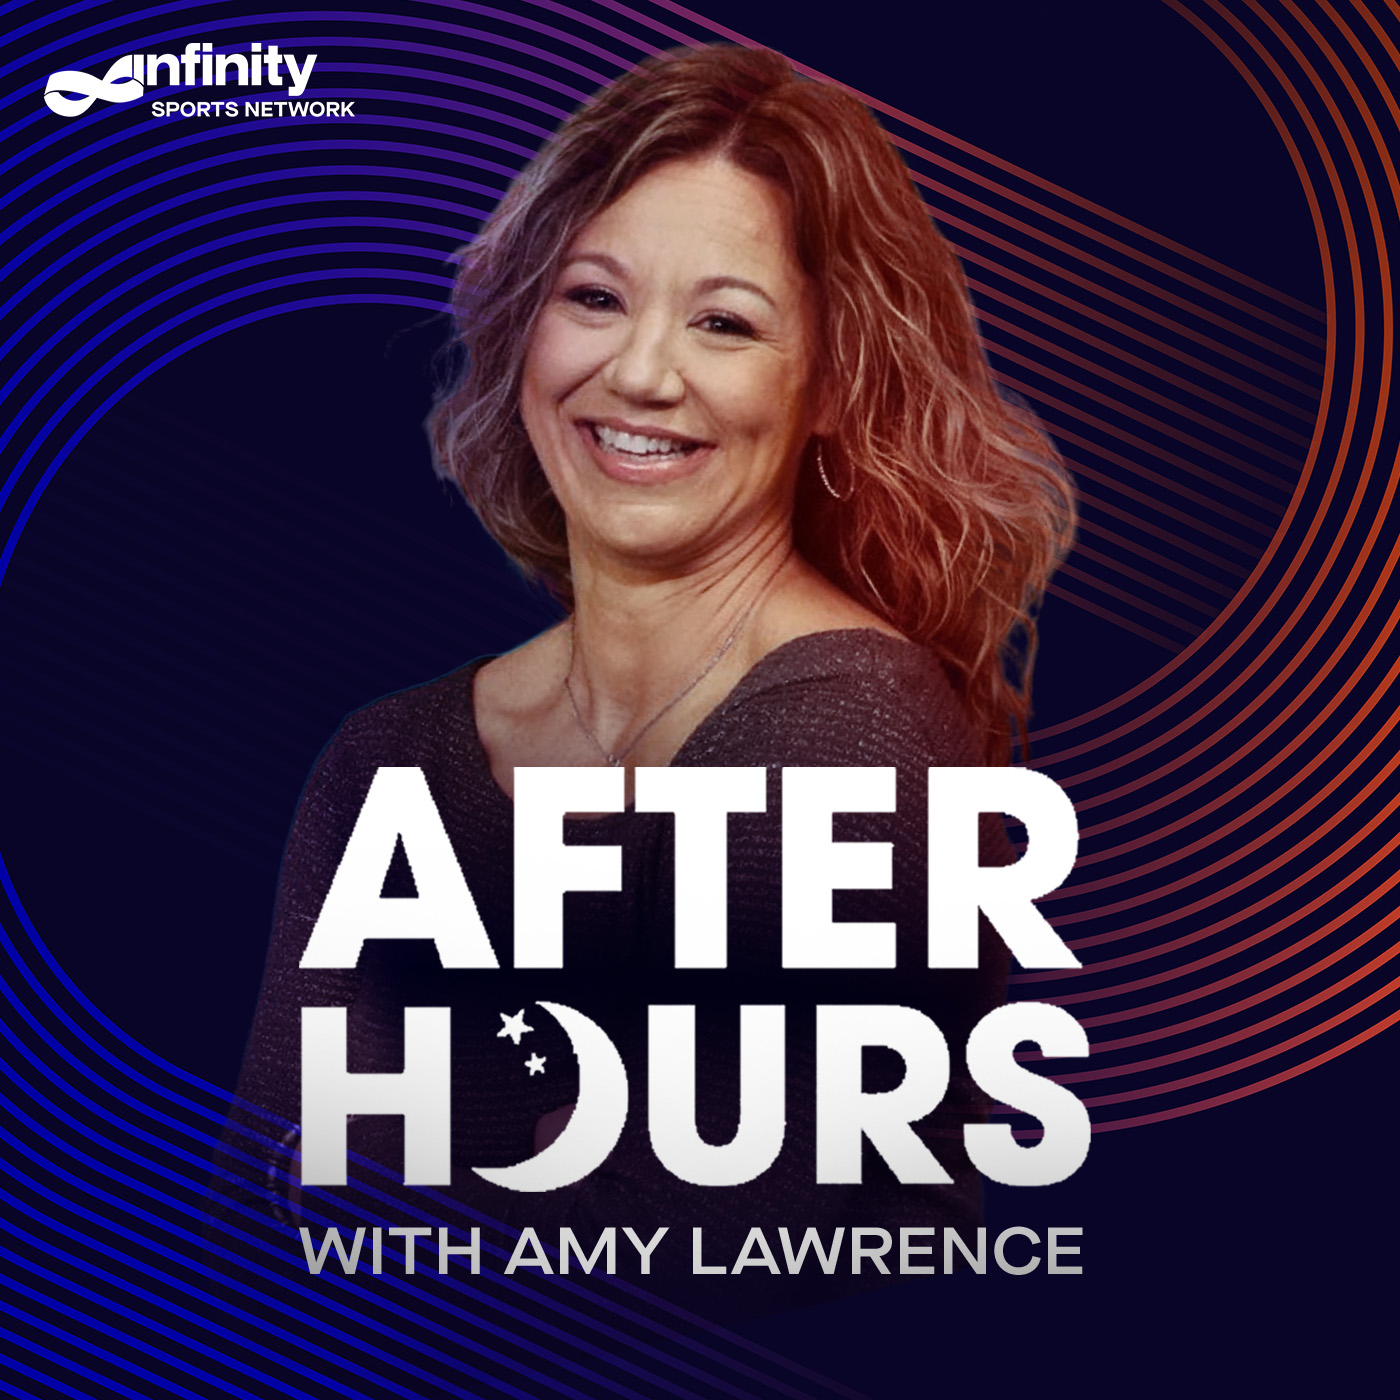 10-13-21 After Hours with Amy Lawrence PODCAST: Hour 3